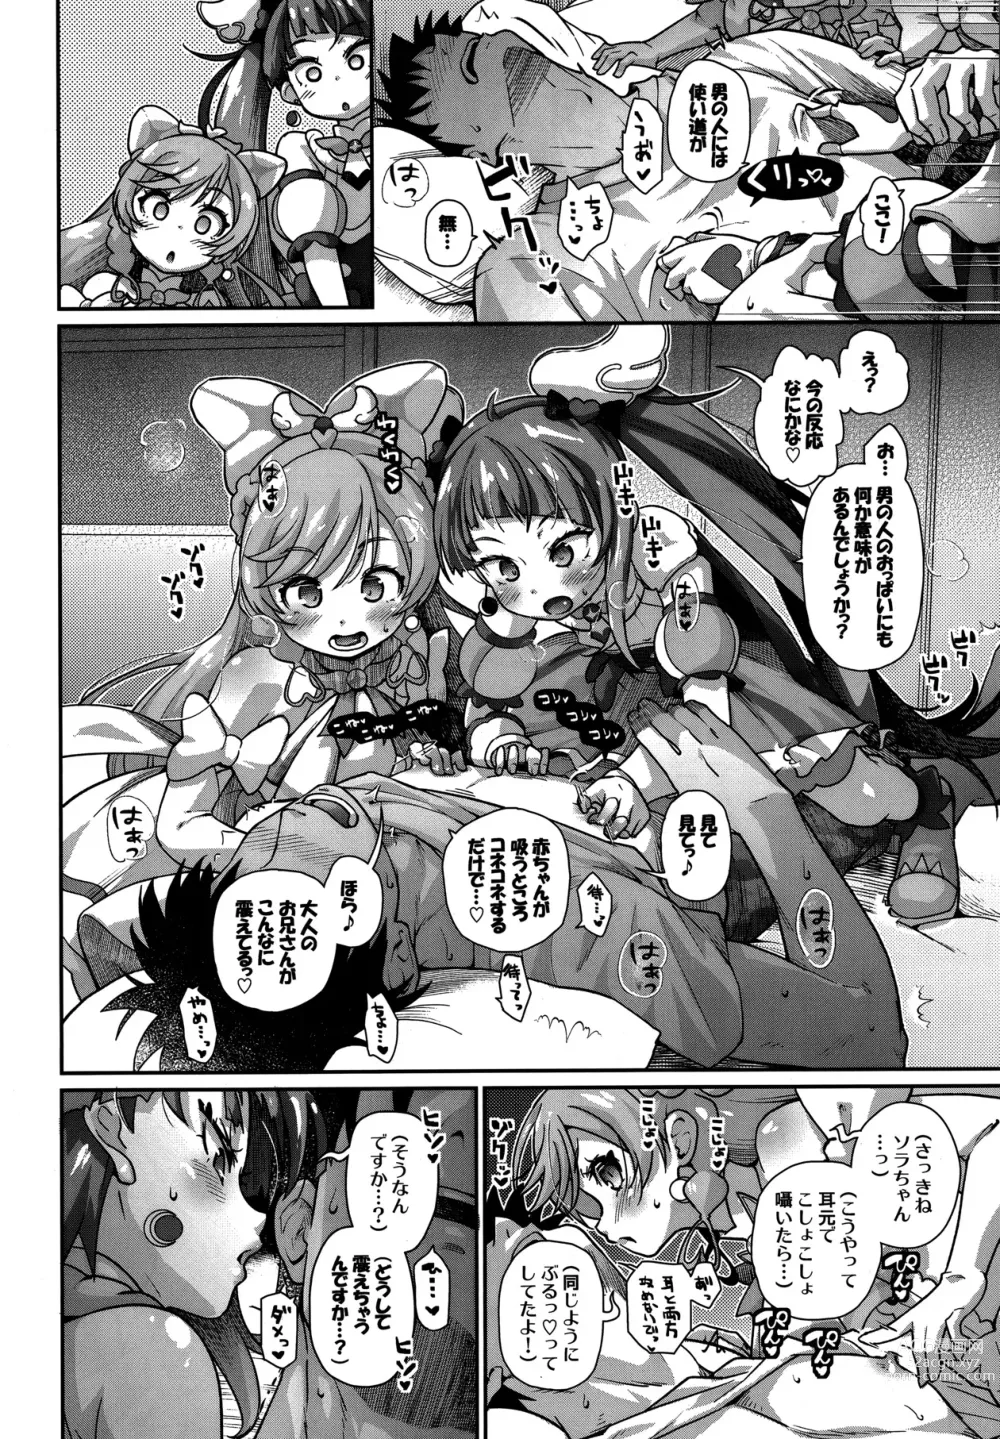 Page 8 of doujinshi Sora-chan IS THE LIMIT